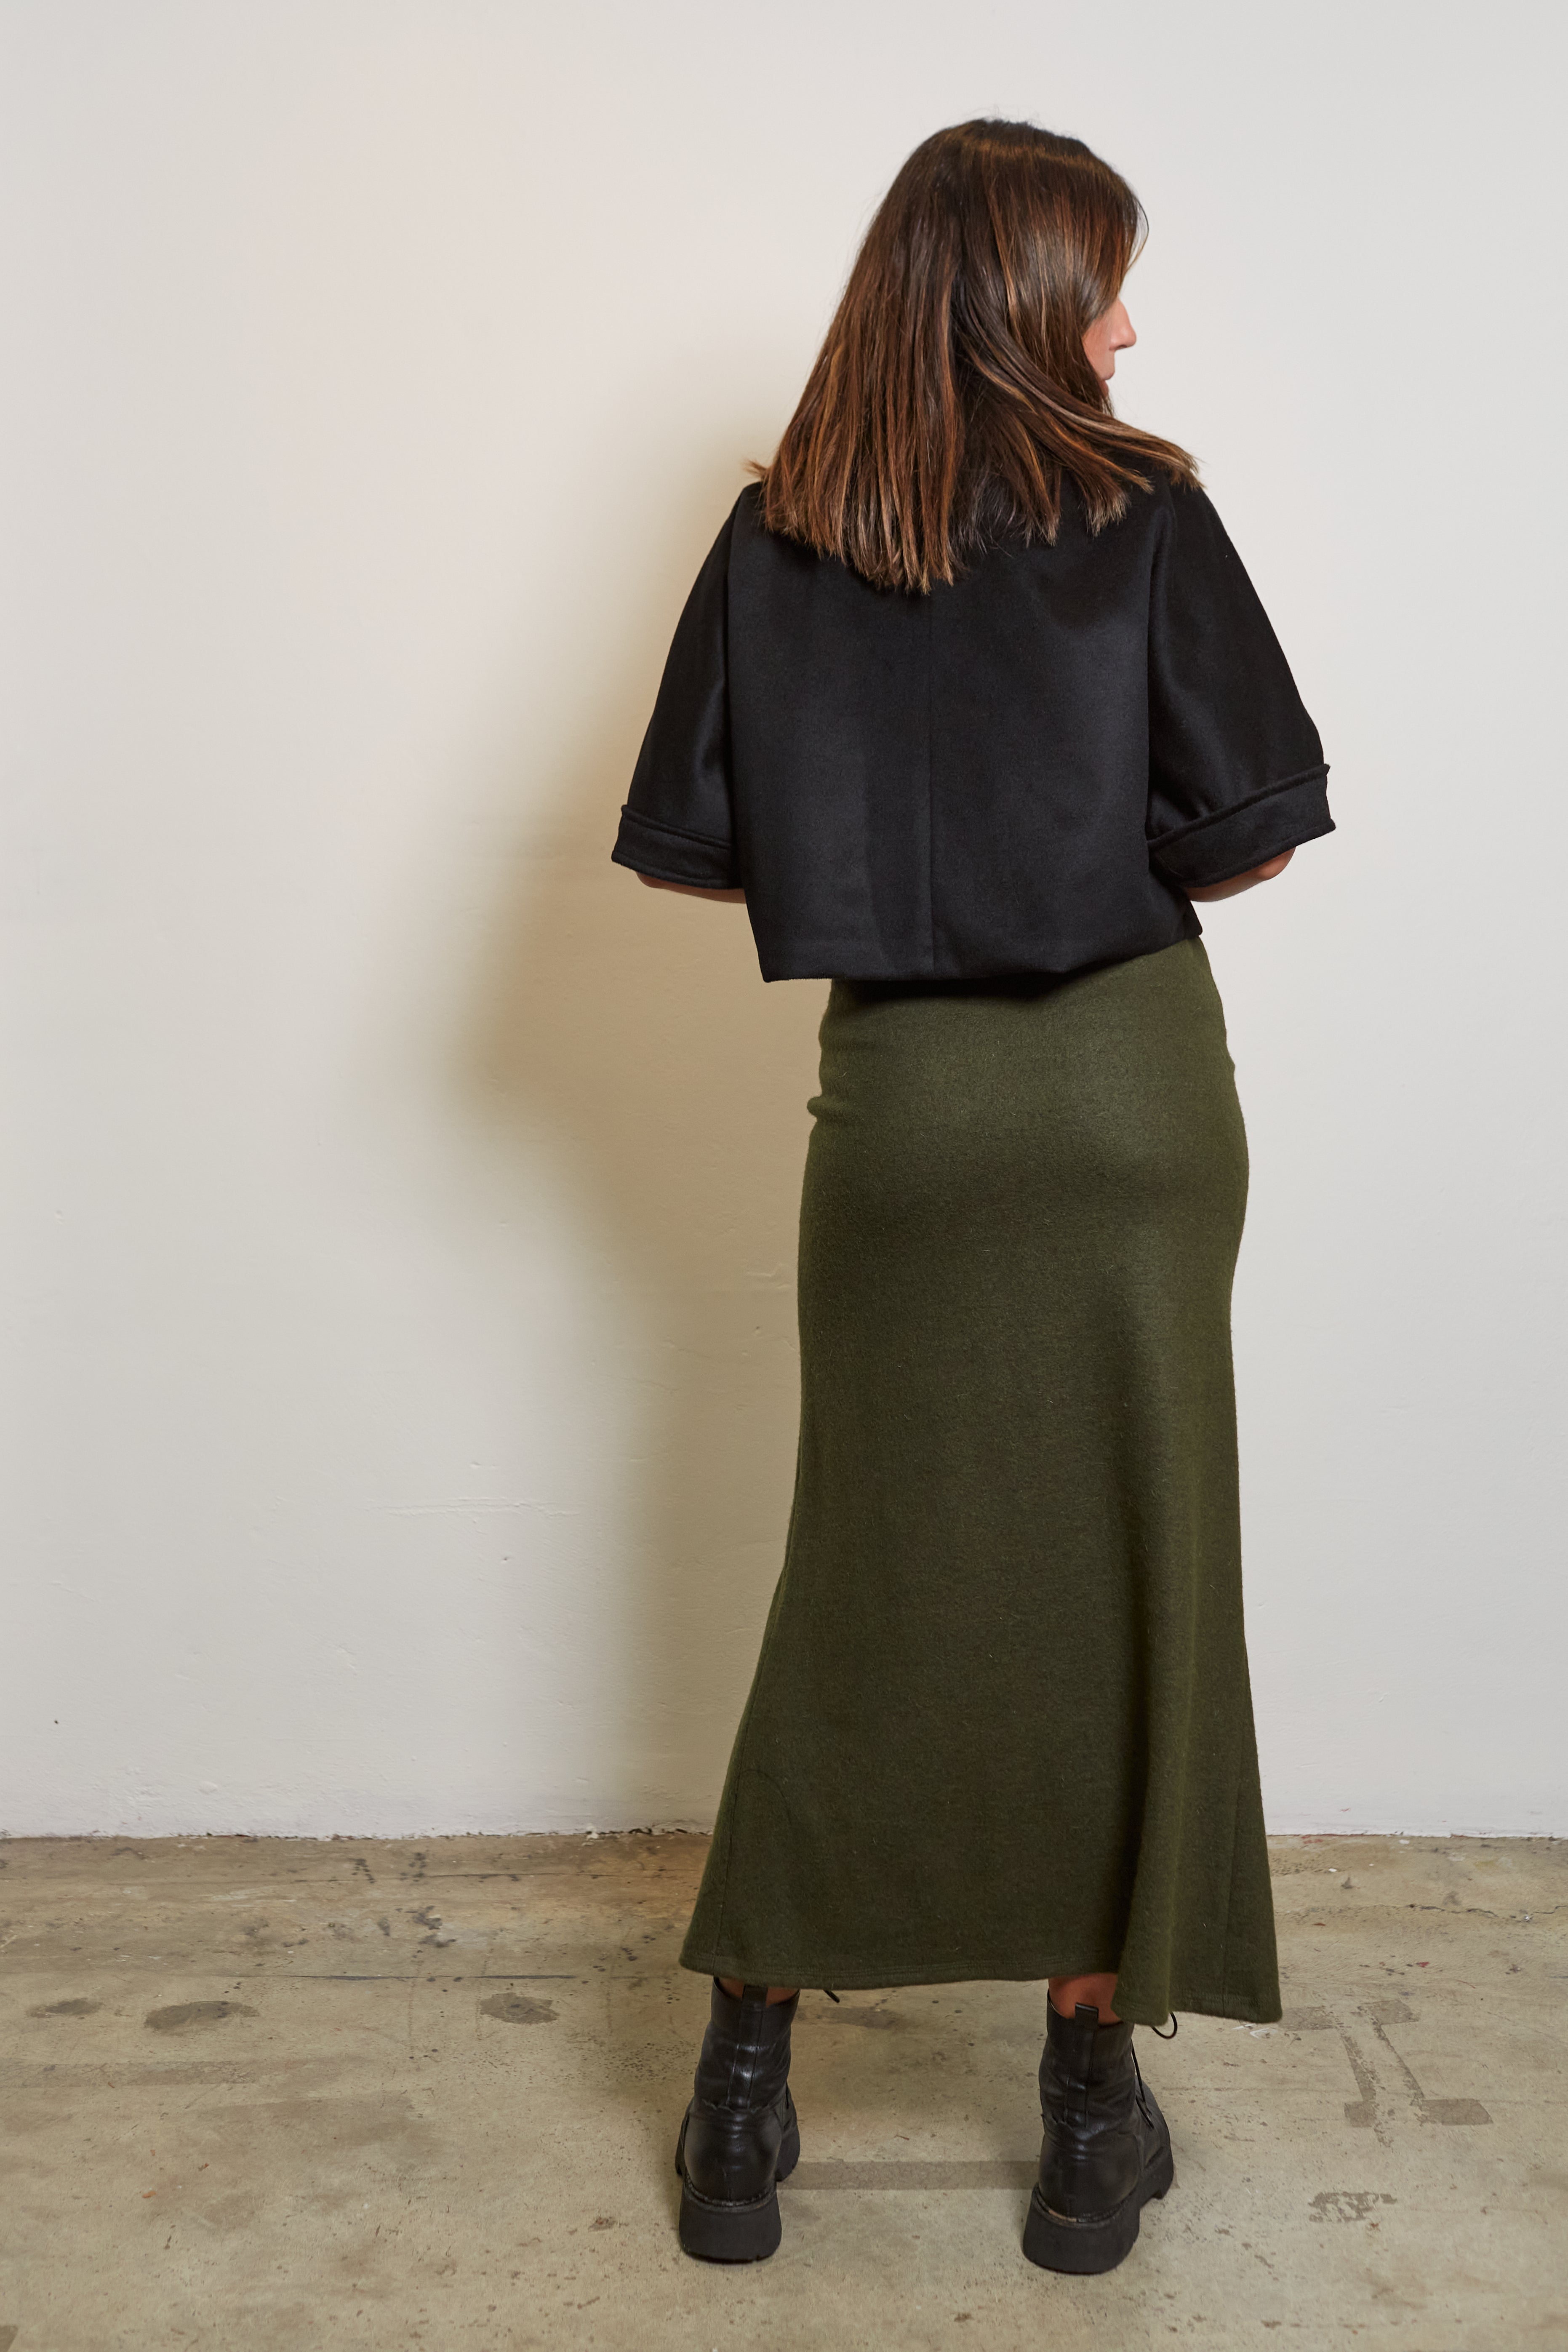 Alice Rusched skirt